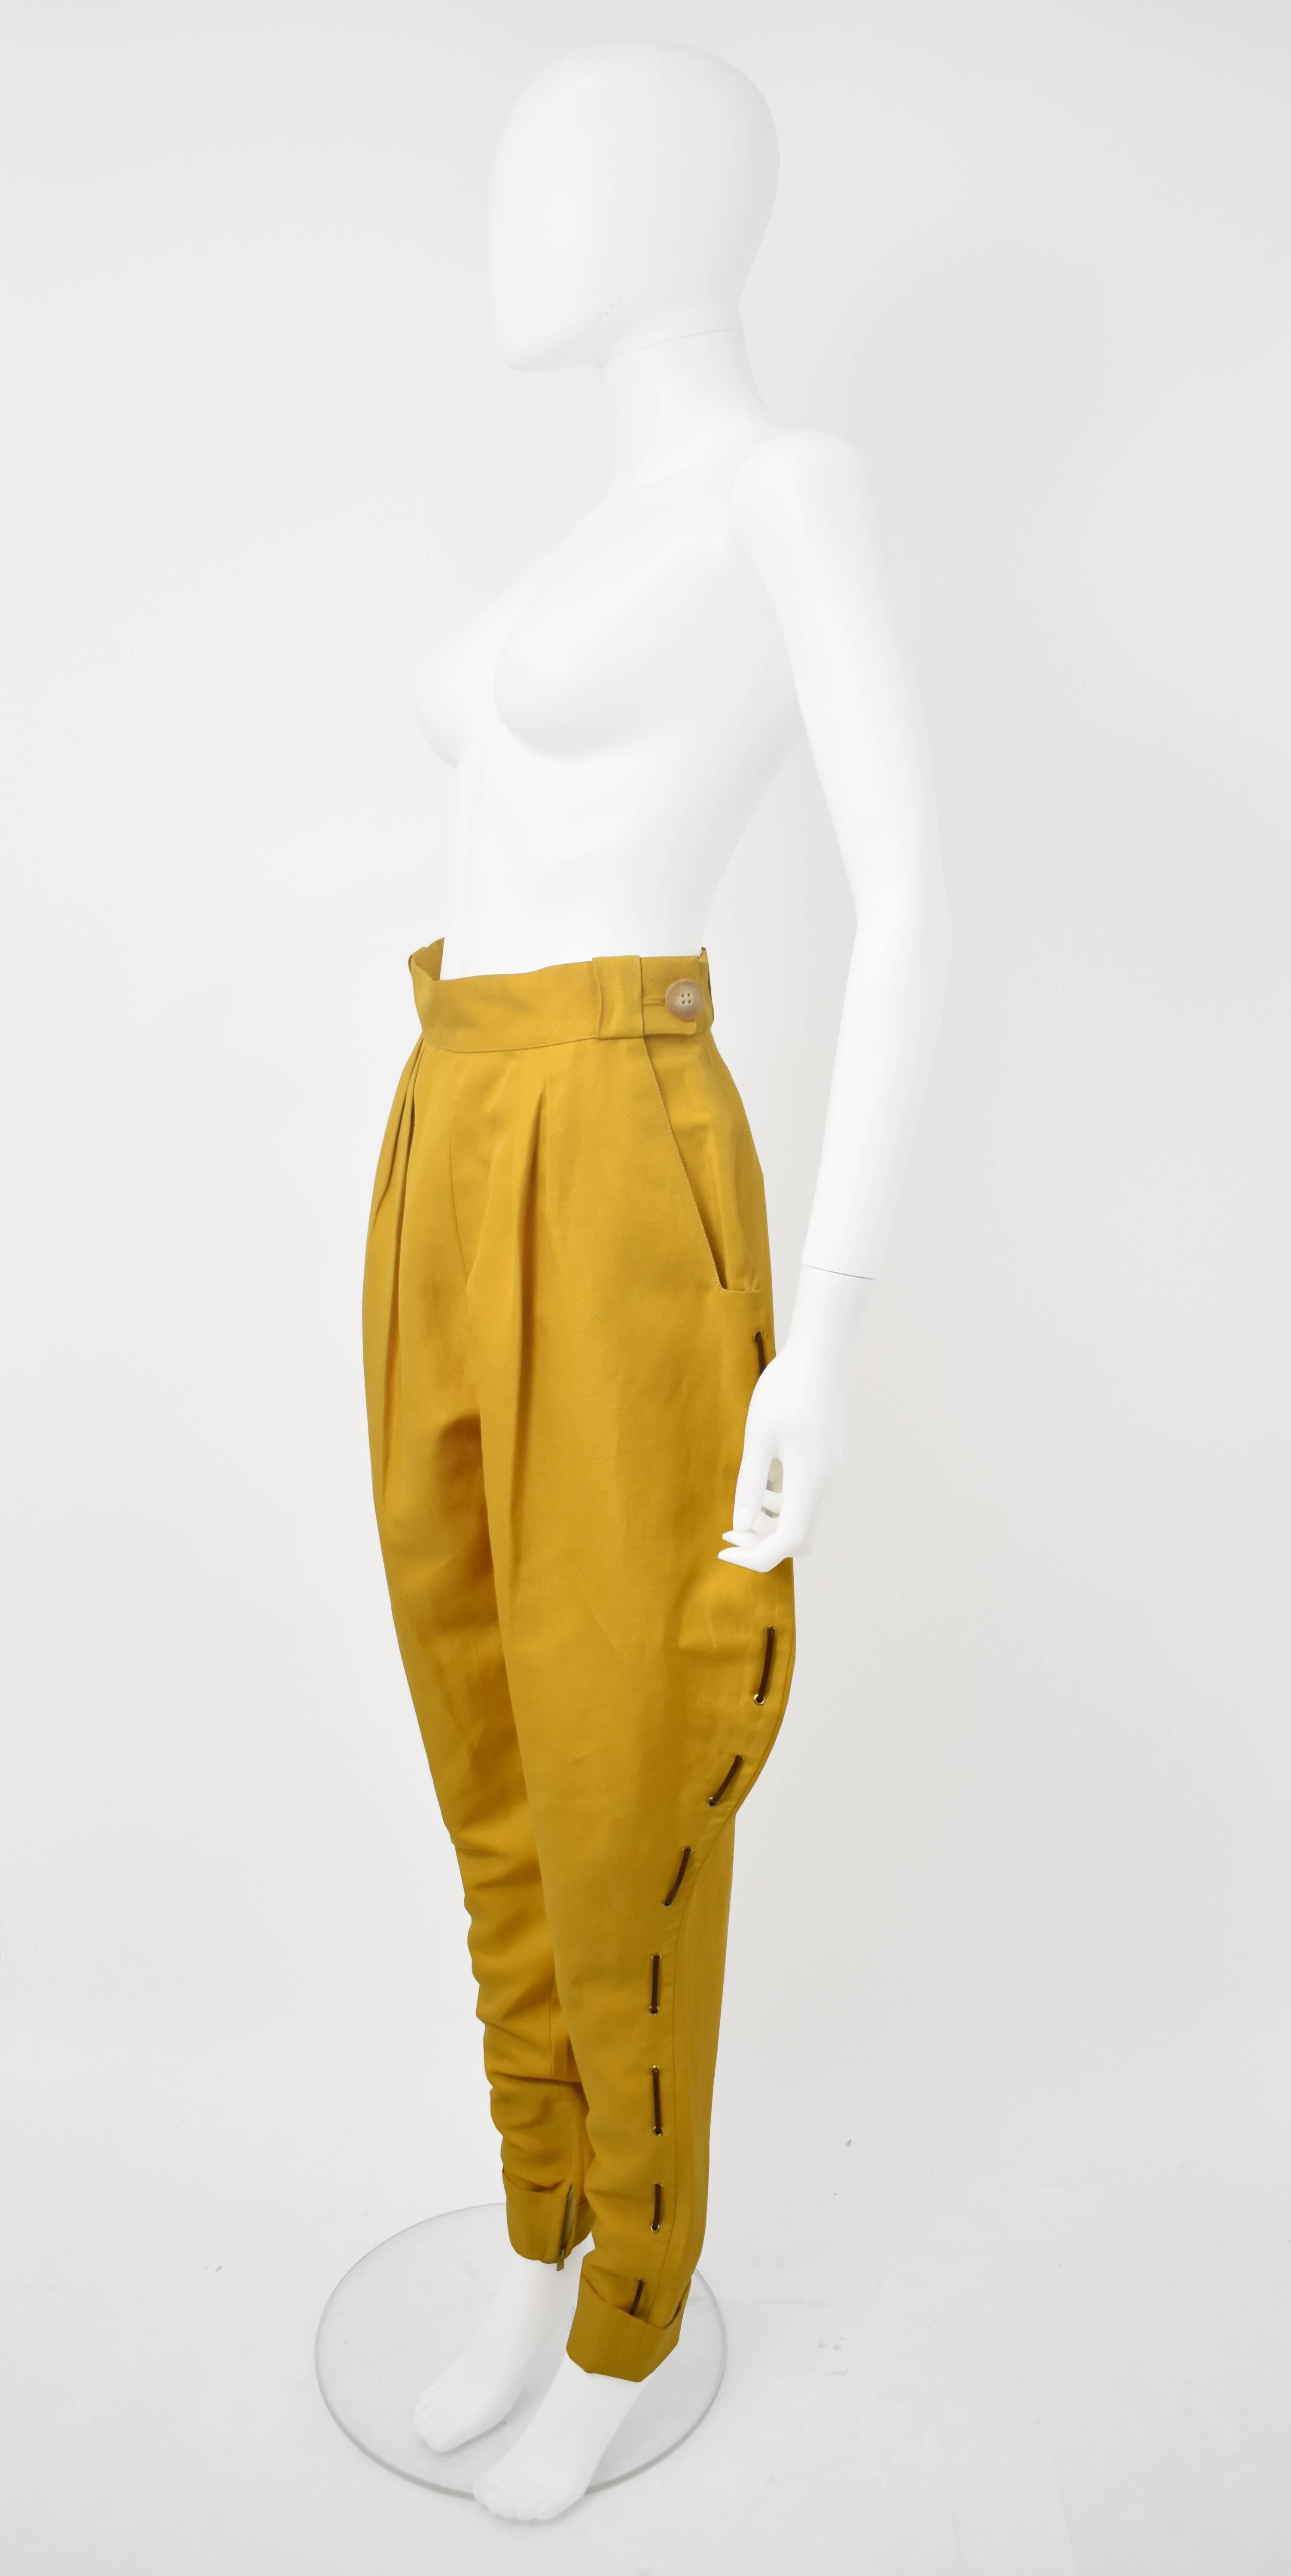 A fantastic pair of mustard yellow jodhpur trousers from luxury fashion house Hermes. The trousers have a traditional jodhpur shape that reference the equestrian heritage of the brand; a hight waist, volume around the hips and thighs and legs that